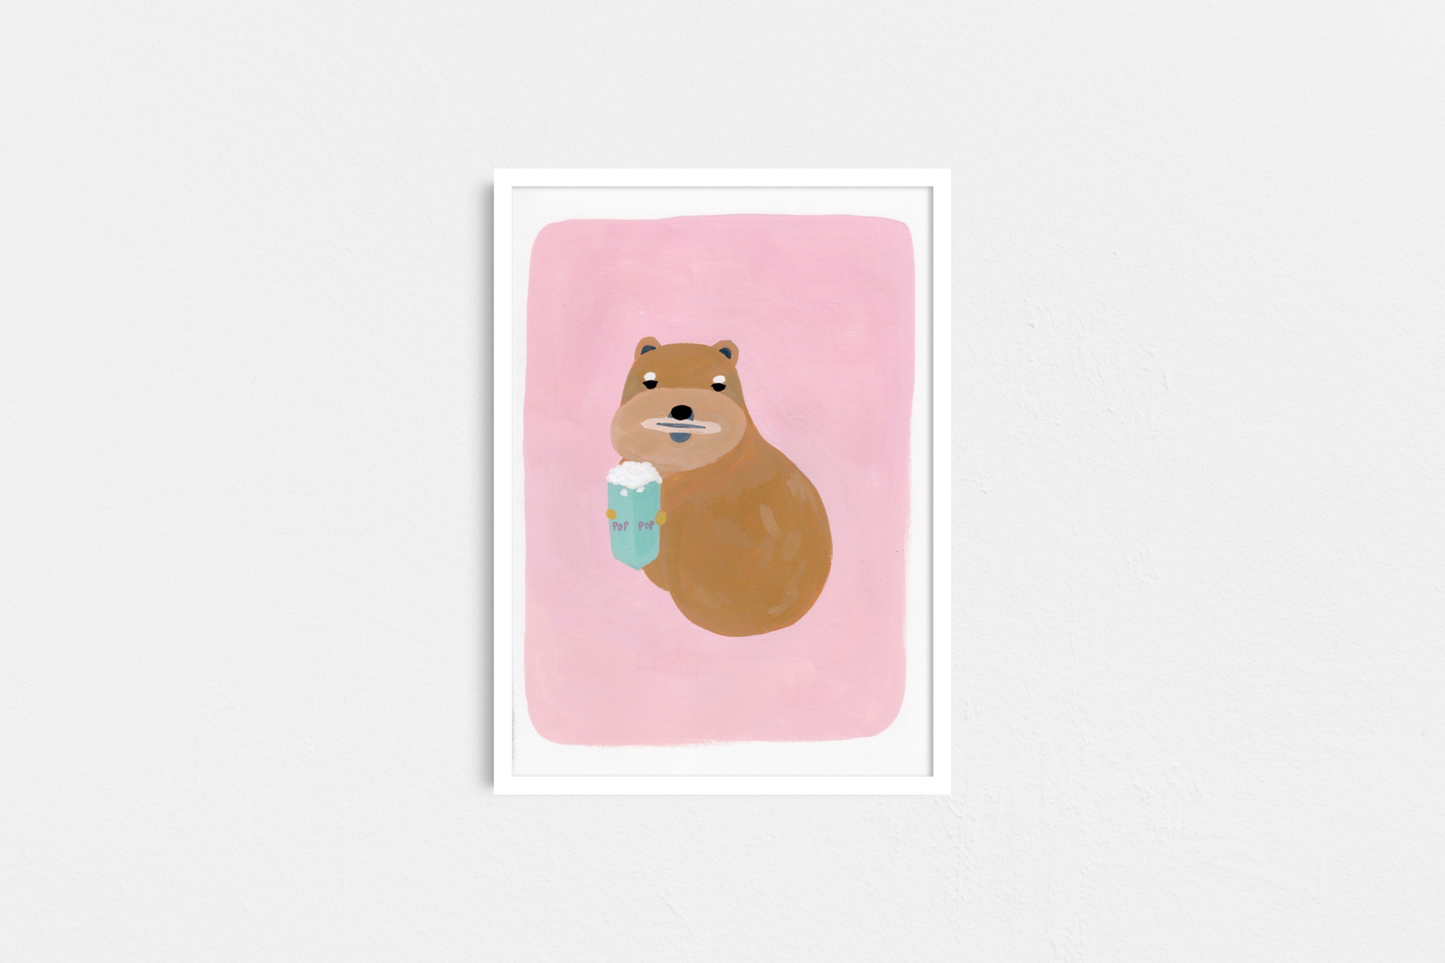 Hyrax gouache painting art print in a framed mockup